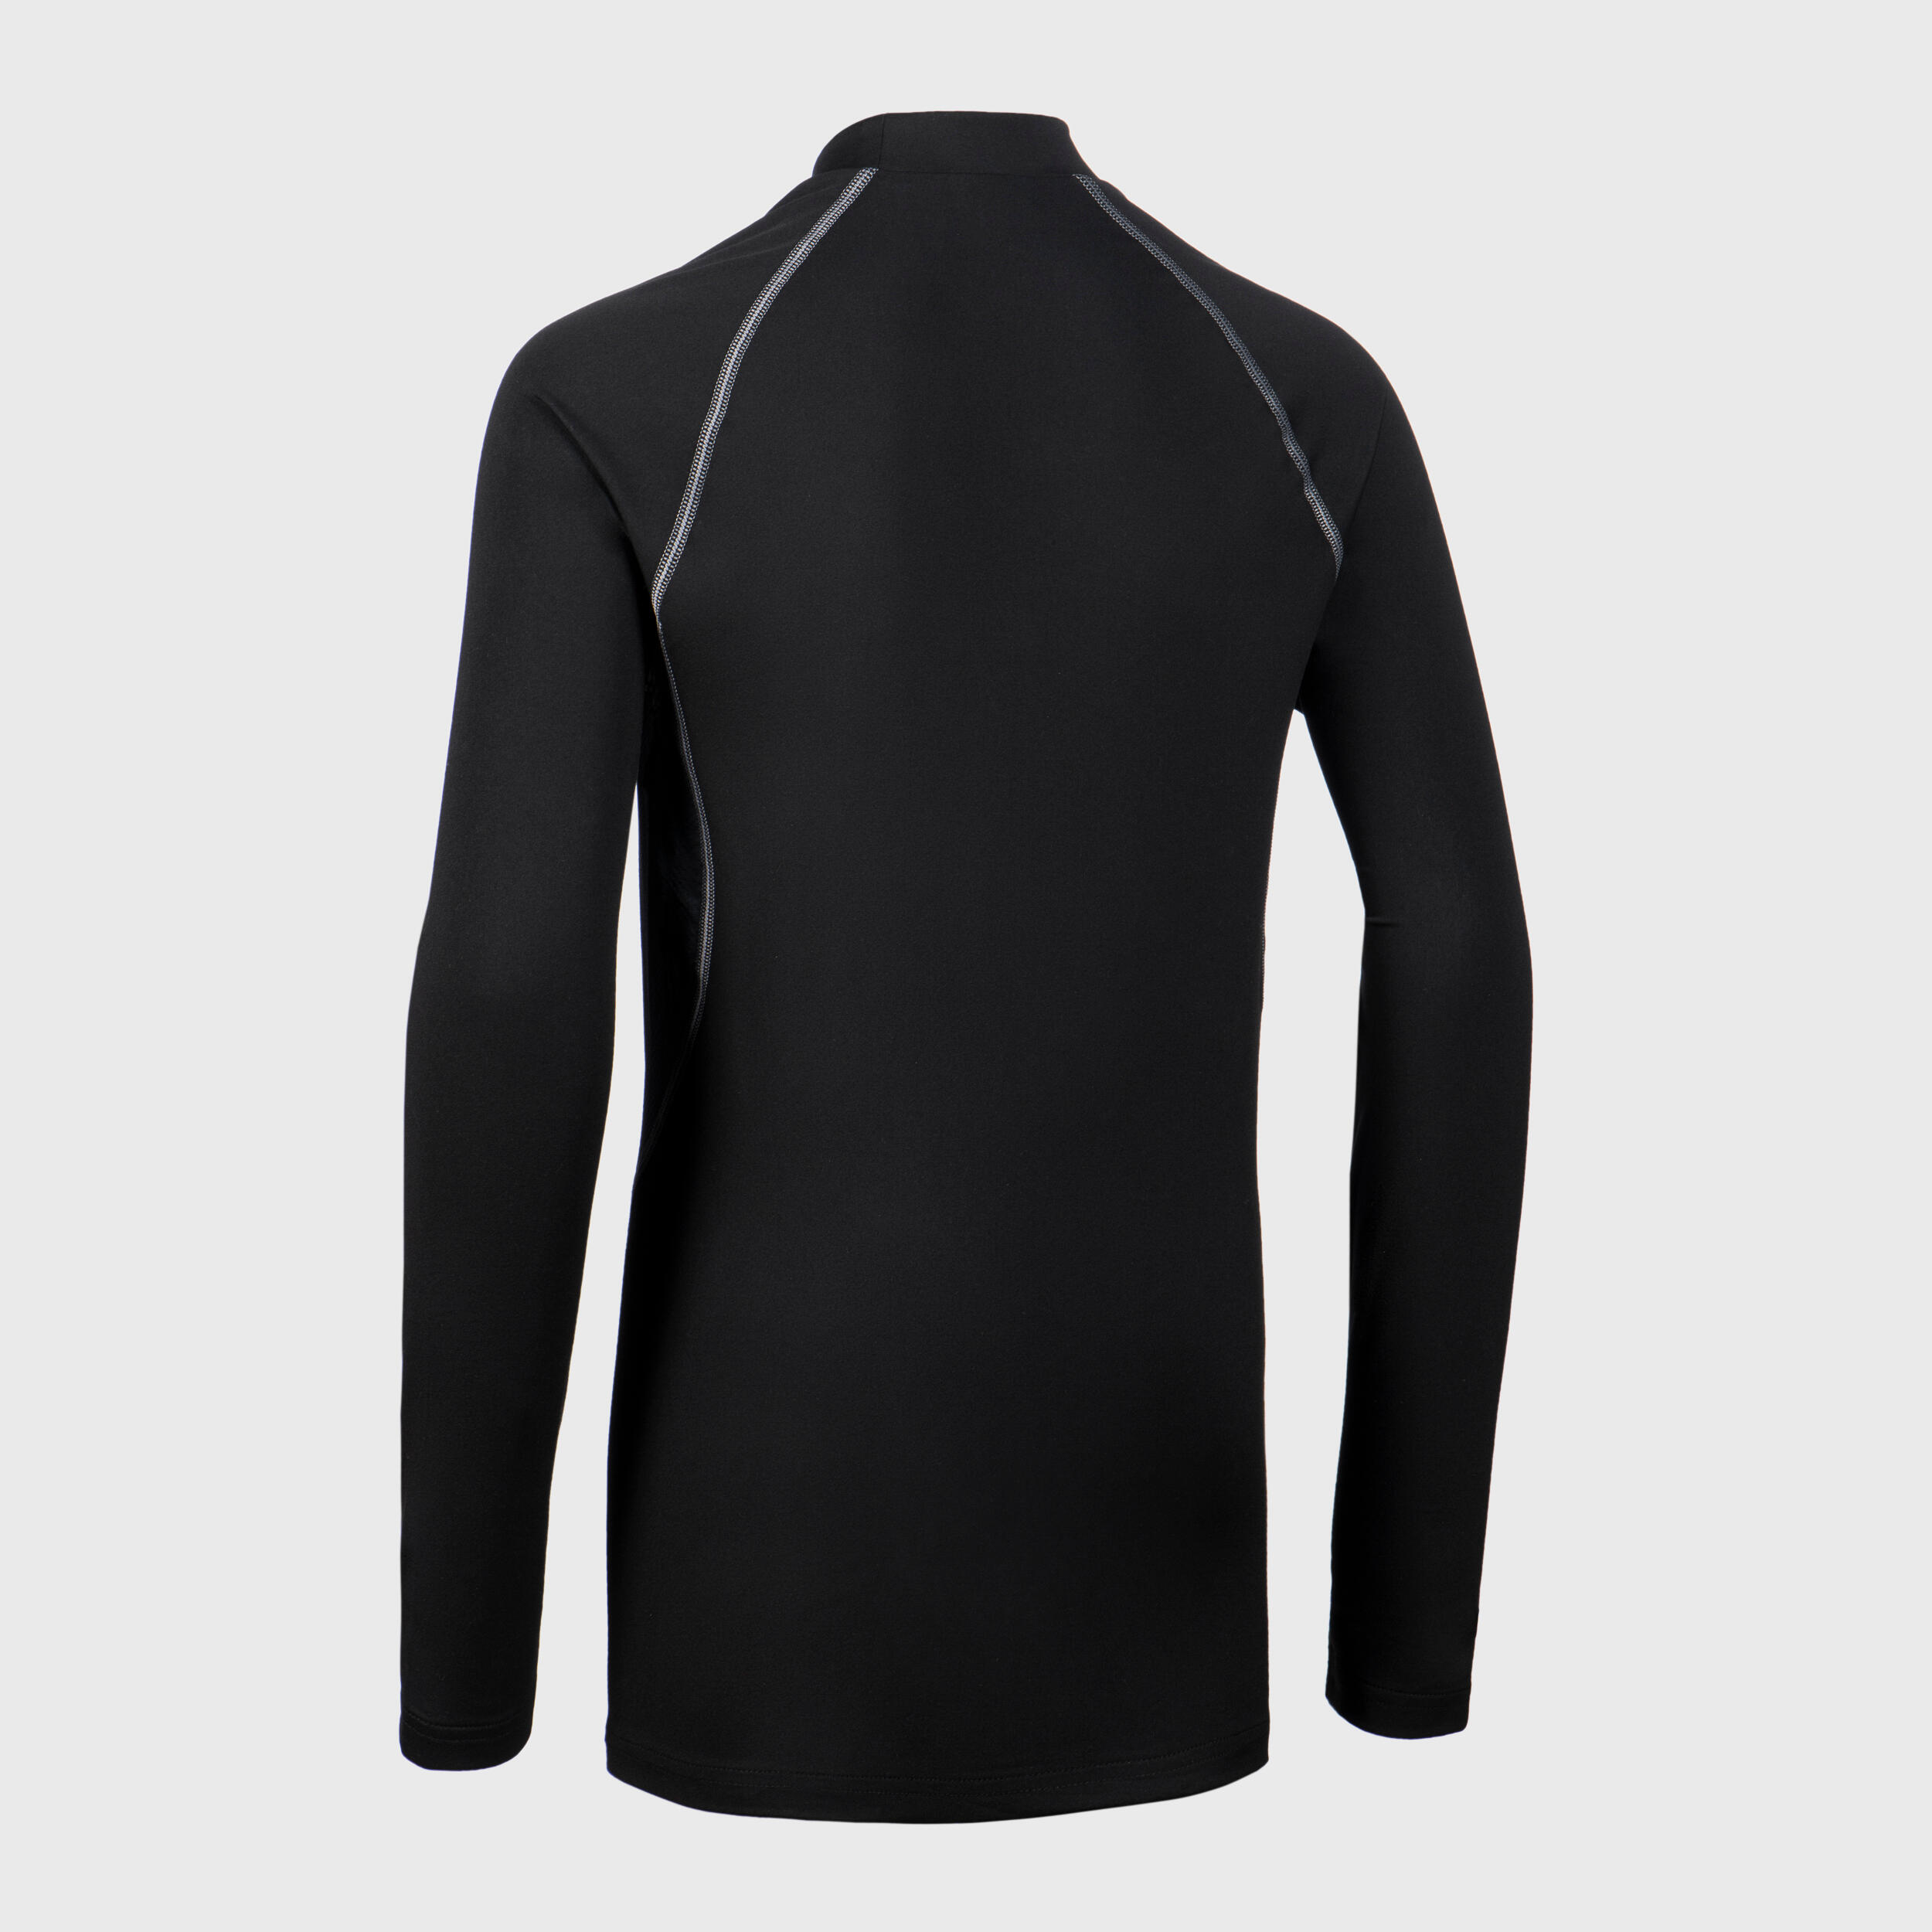 Kids' Long-Sleeved Rugby Base Layer Top R500 - Black 2/5